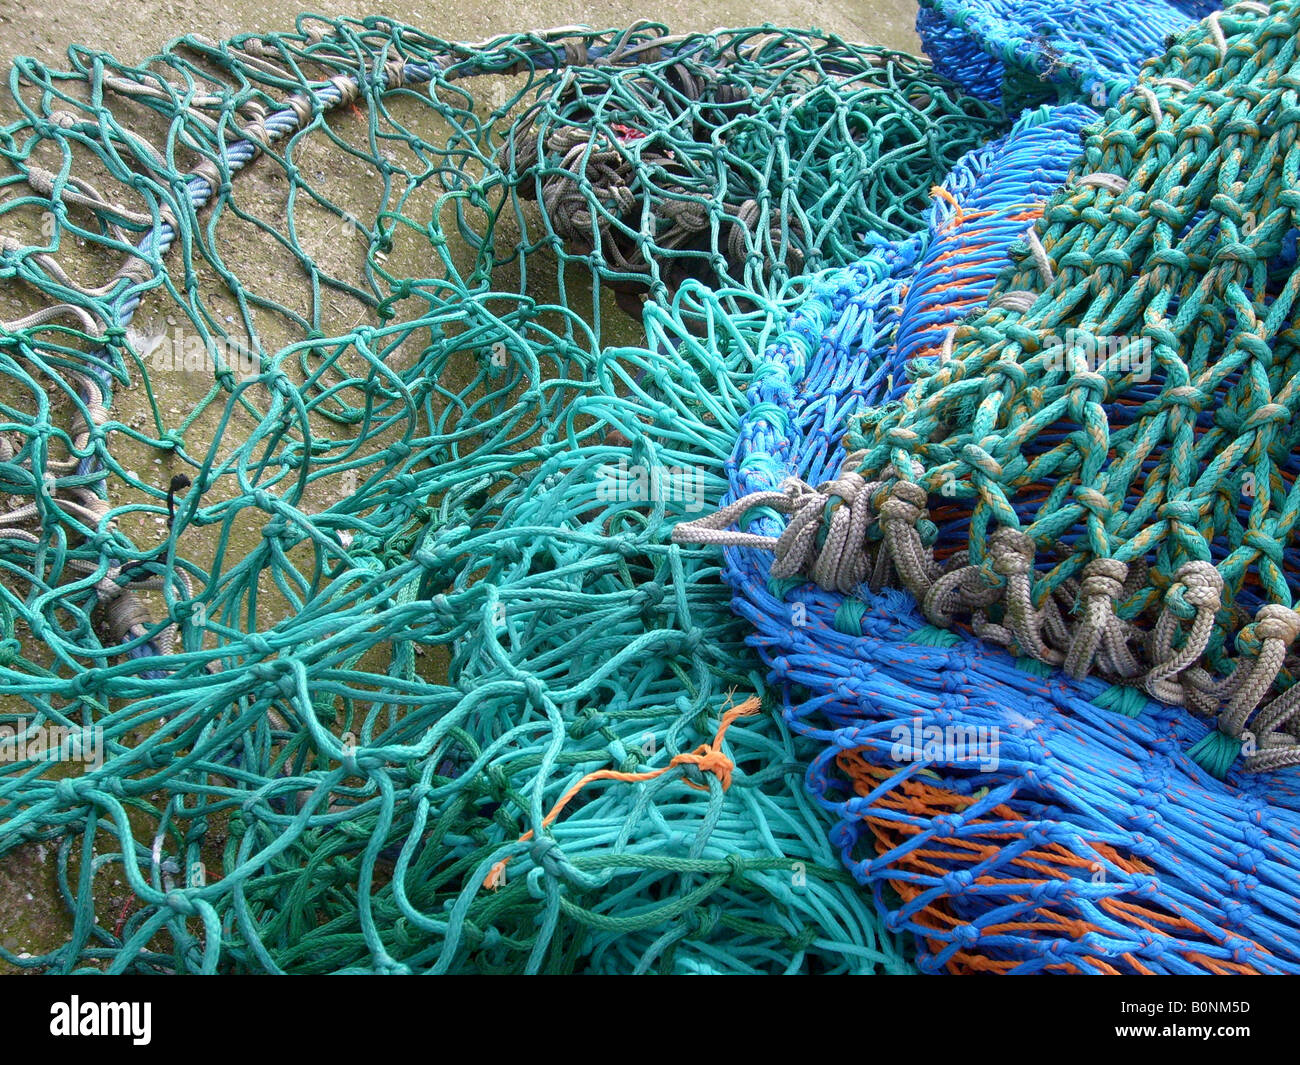 Colorful fishing nets, Scarborough, North Yorkshire, England. Stock Photo